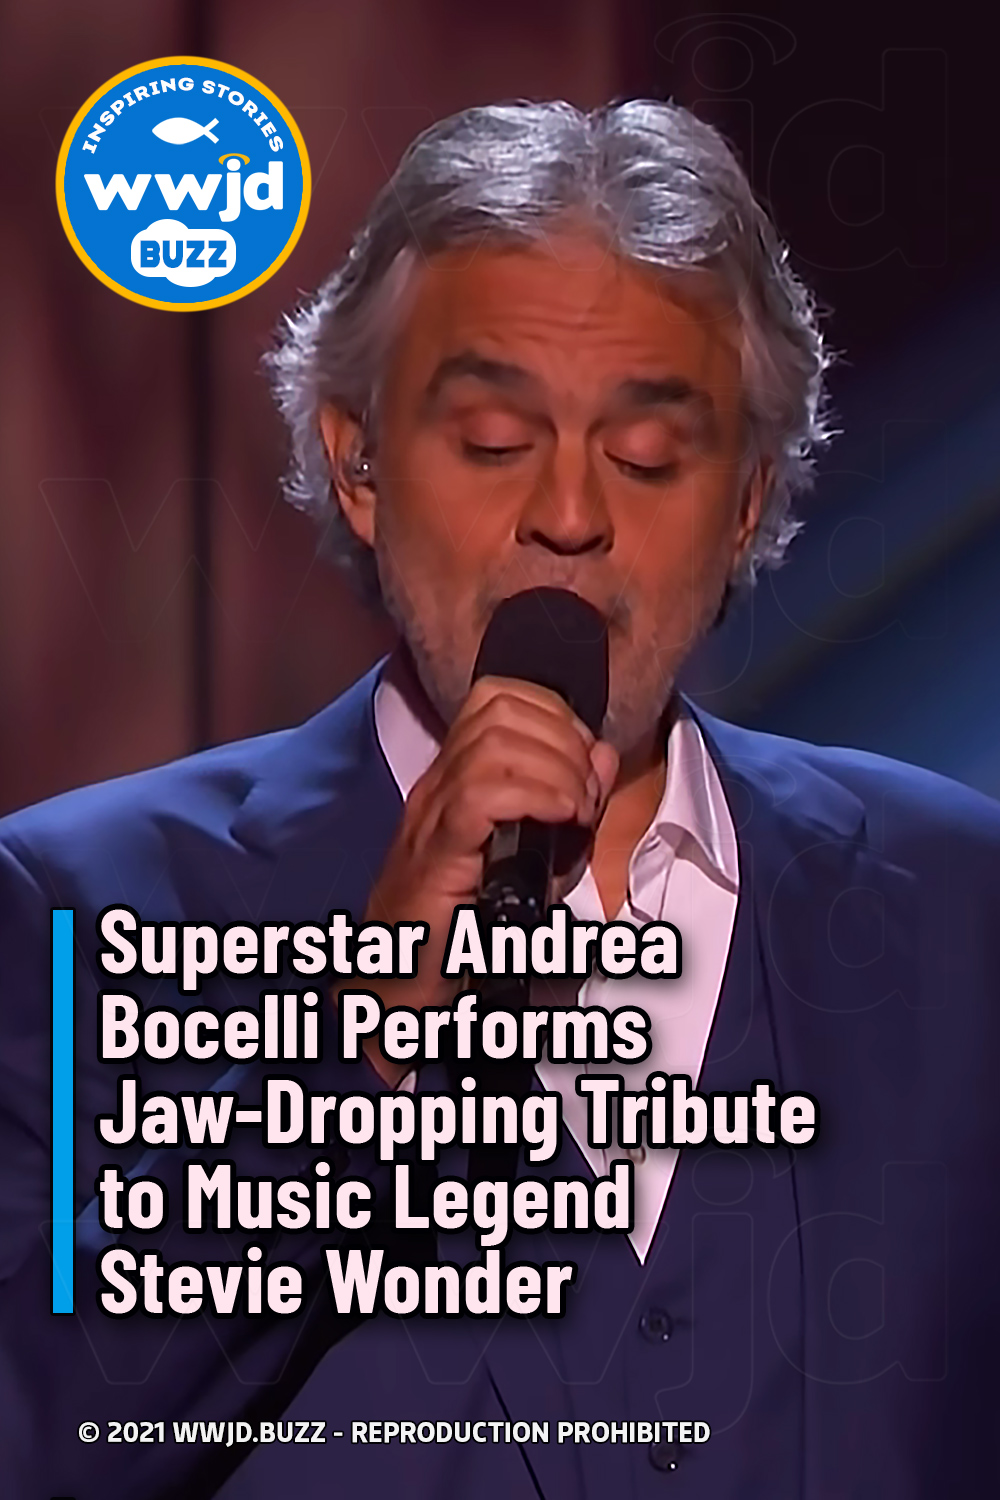 Superstar Andrea Bocelli Performs Jaw-Dropping Tribute to Music Legend Stevie Wonder